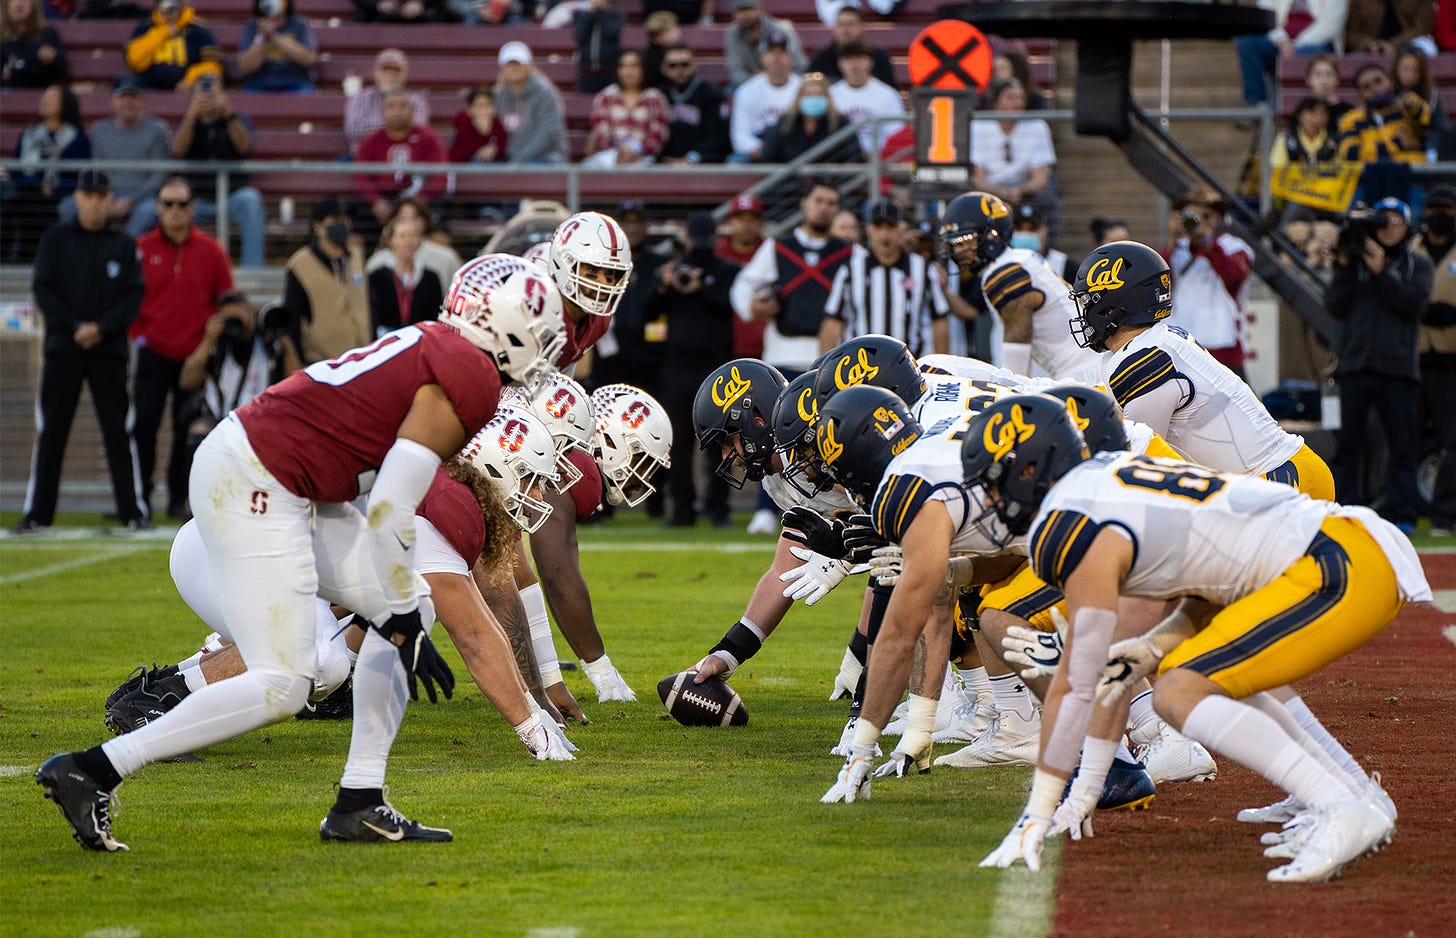 Axe about us: Cal dominates Stanford 41-11 as the Axe comes home